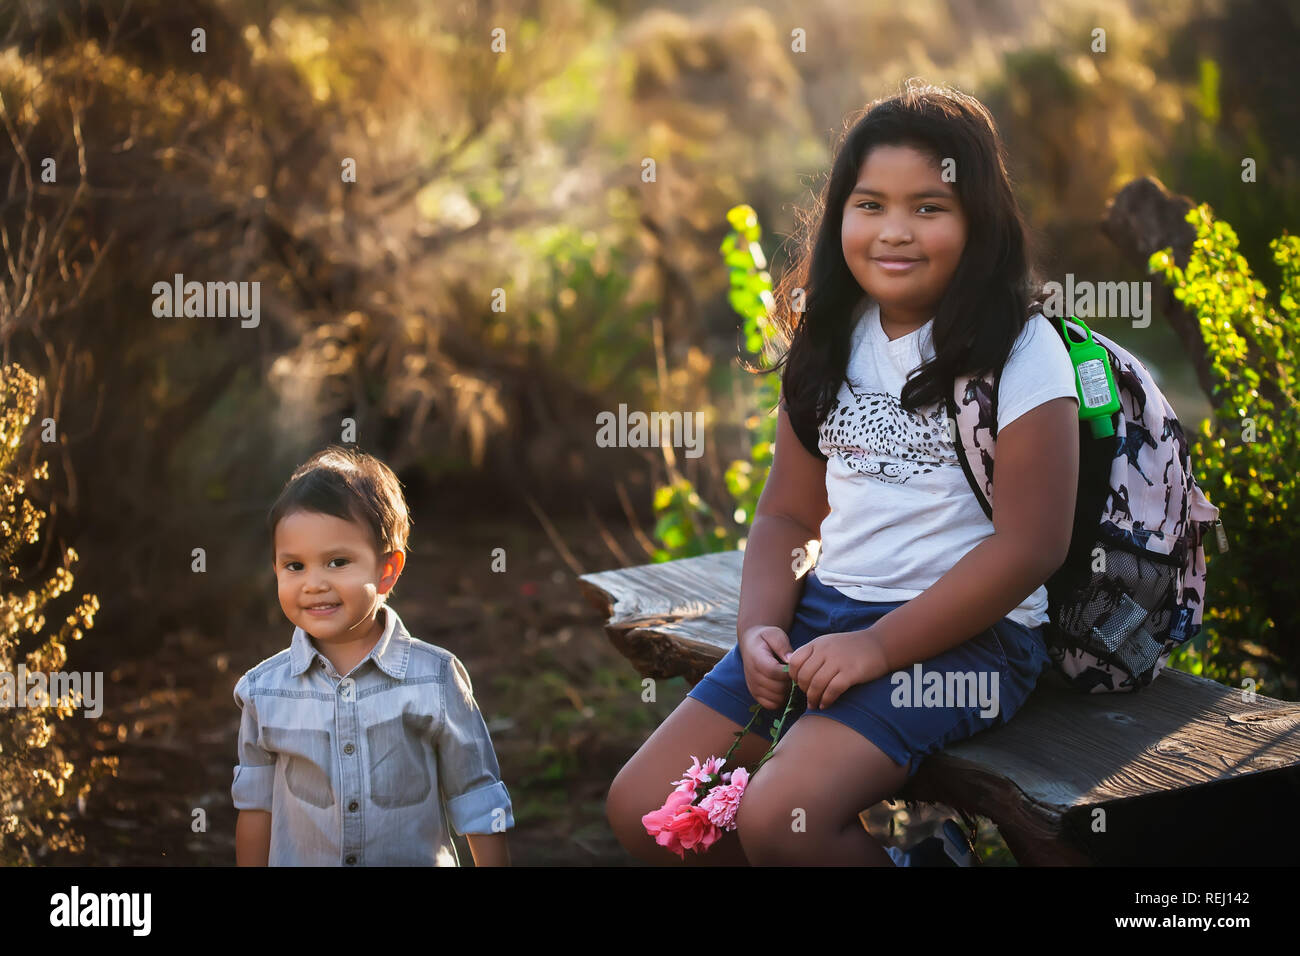 A boy and his older sister are sitting down, taking a break during a hike or field trip while the sun is setting. Stock Photo